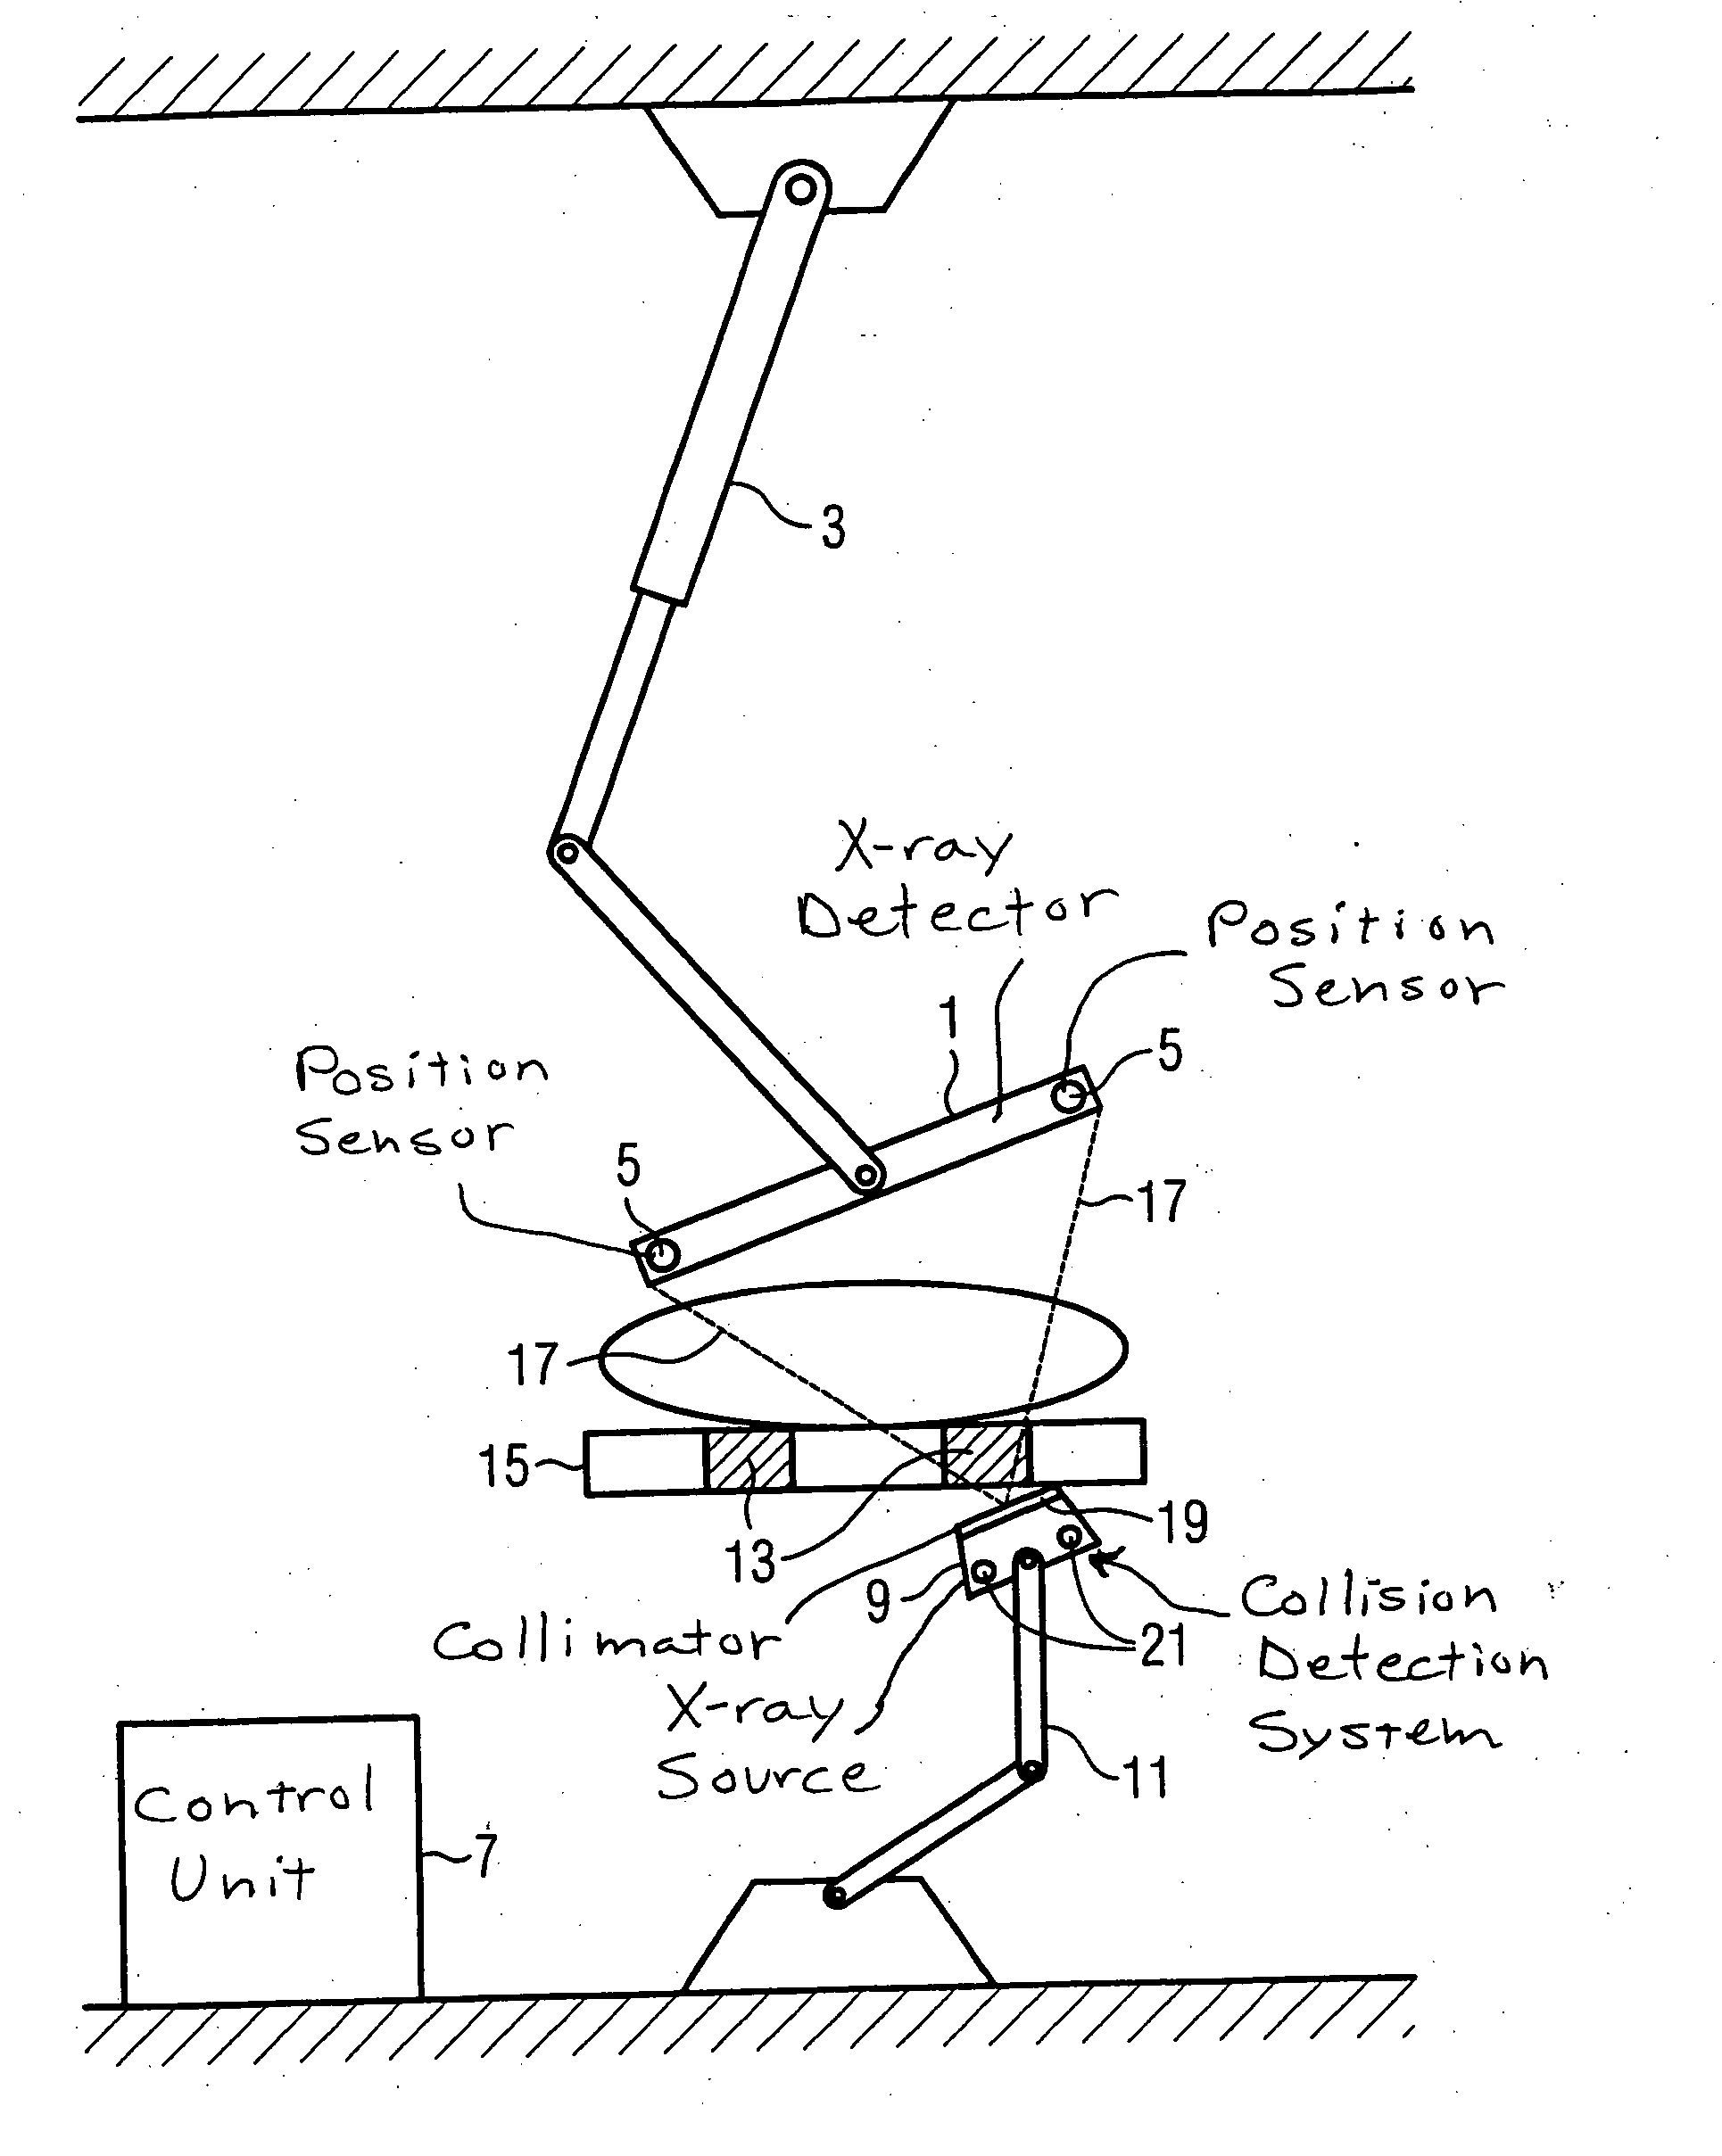 X-ray apparatus with component positioning coordinated with radio-opaque objects in examination room